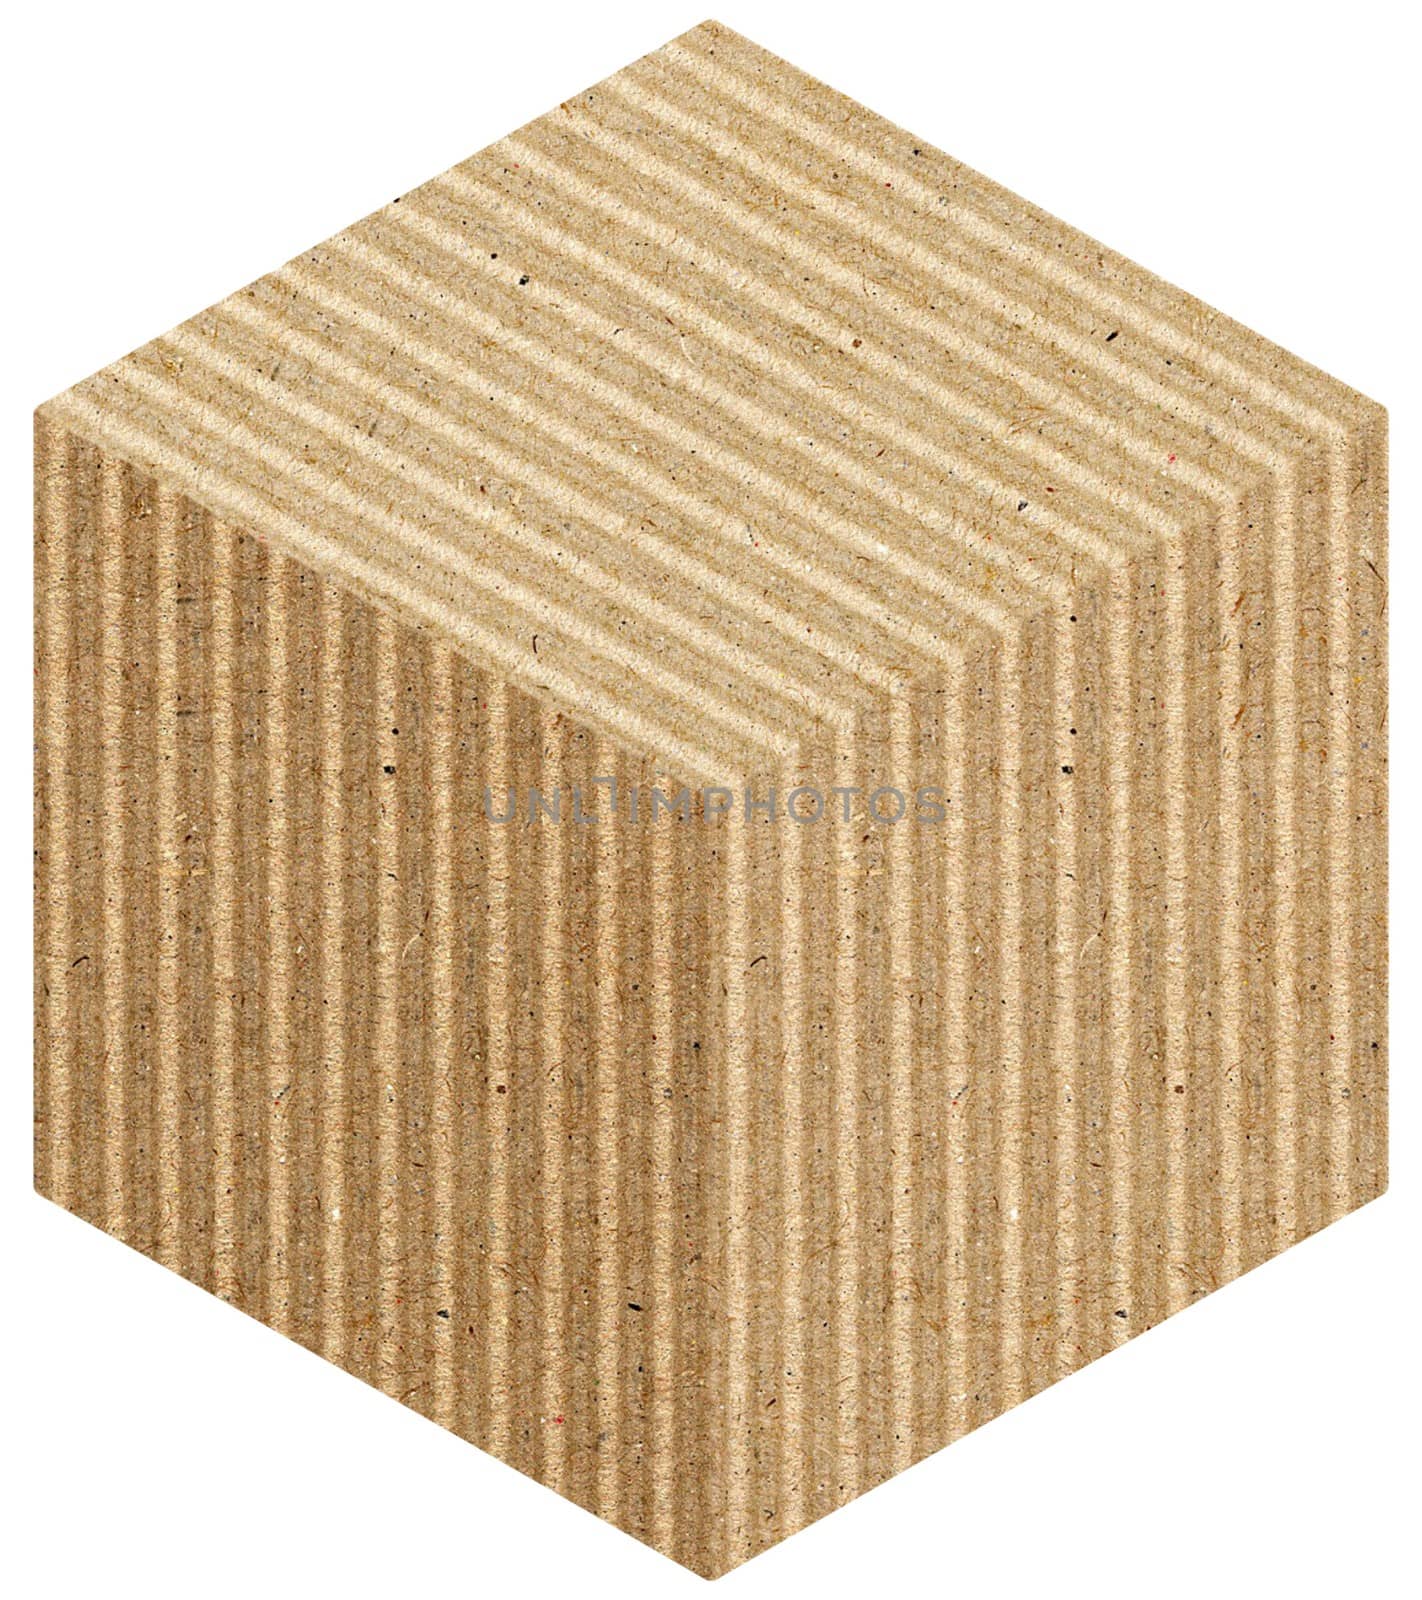 brown corrugated cardboard cube isolated over white by claudiodivizia